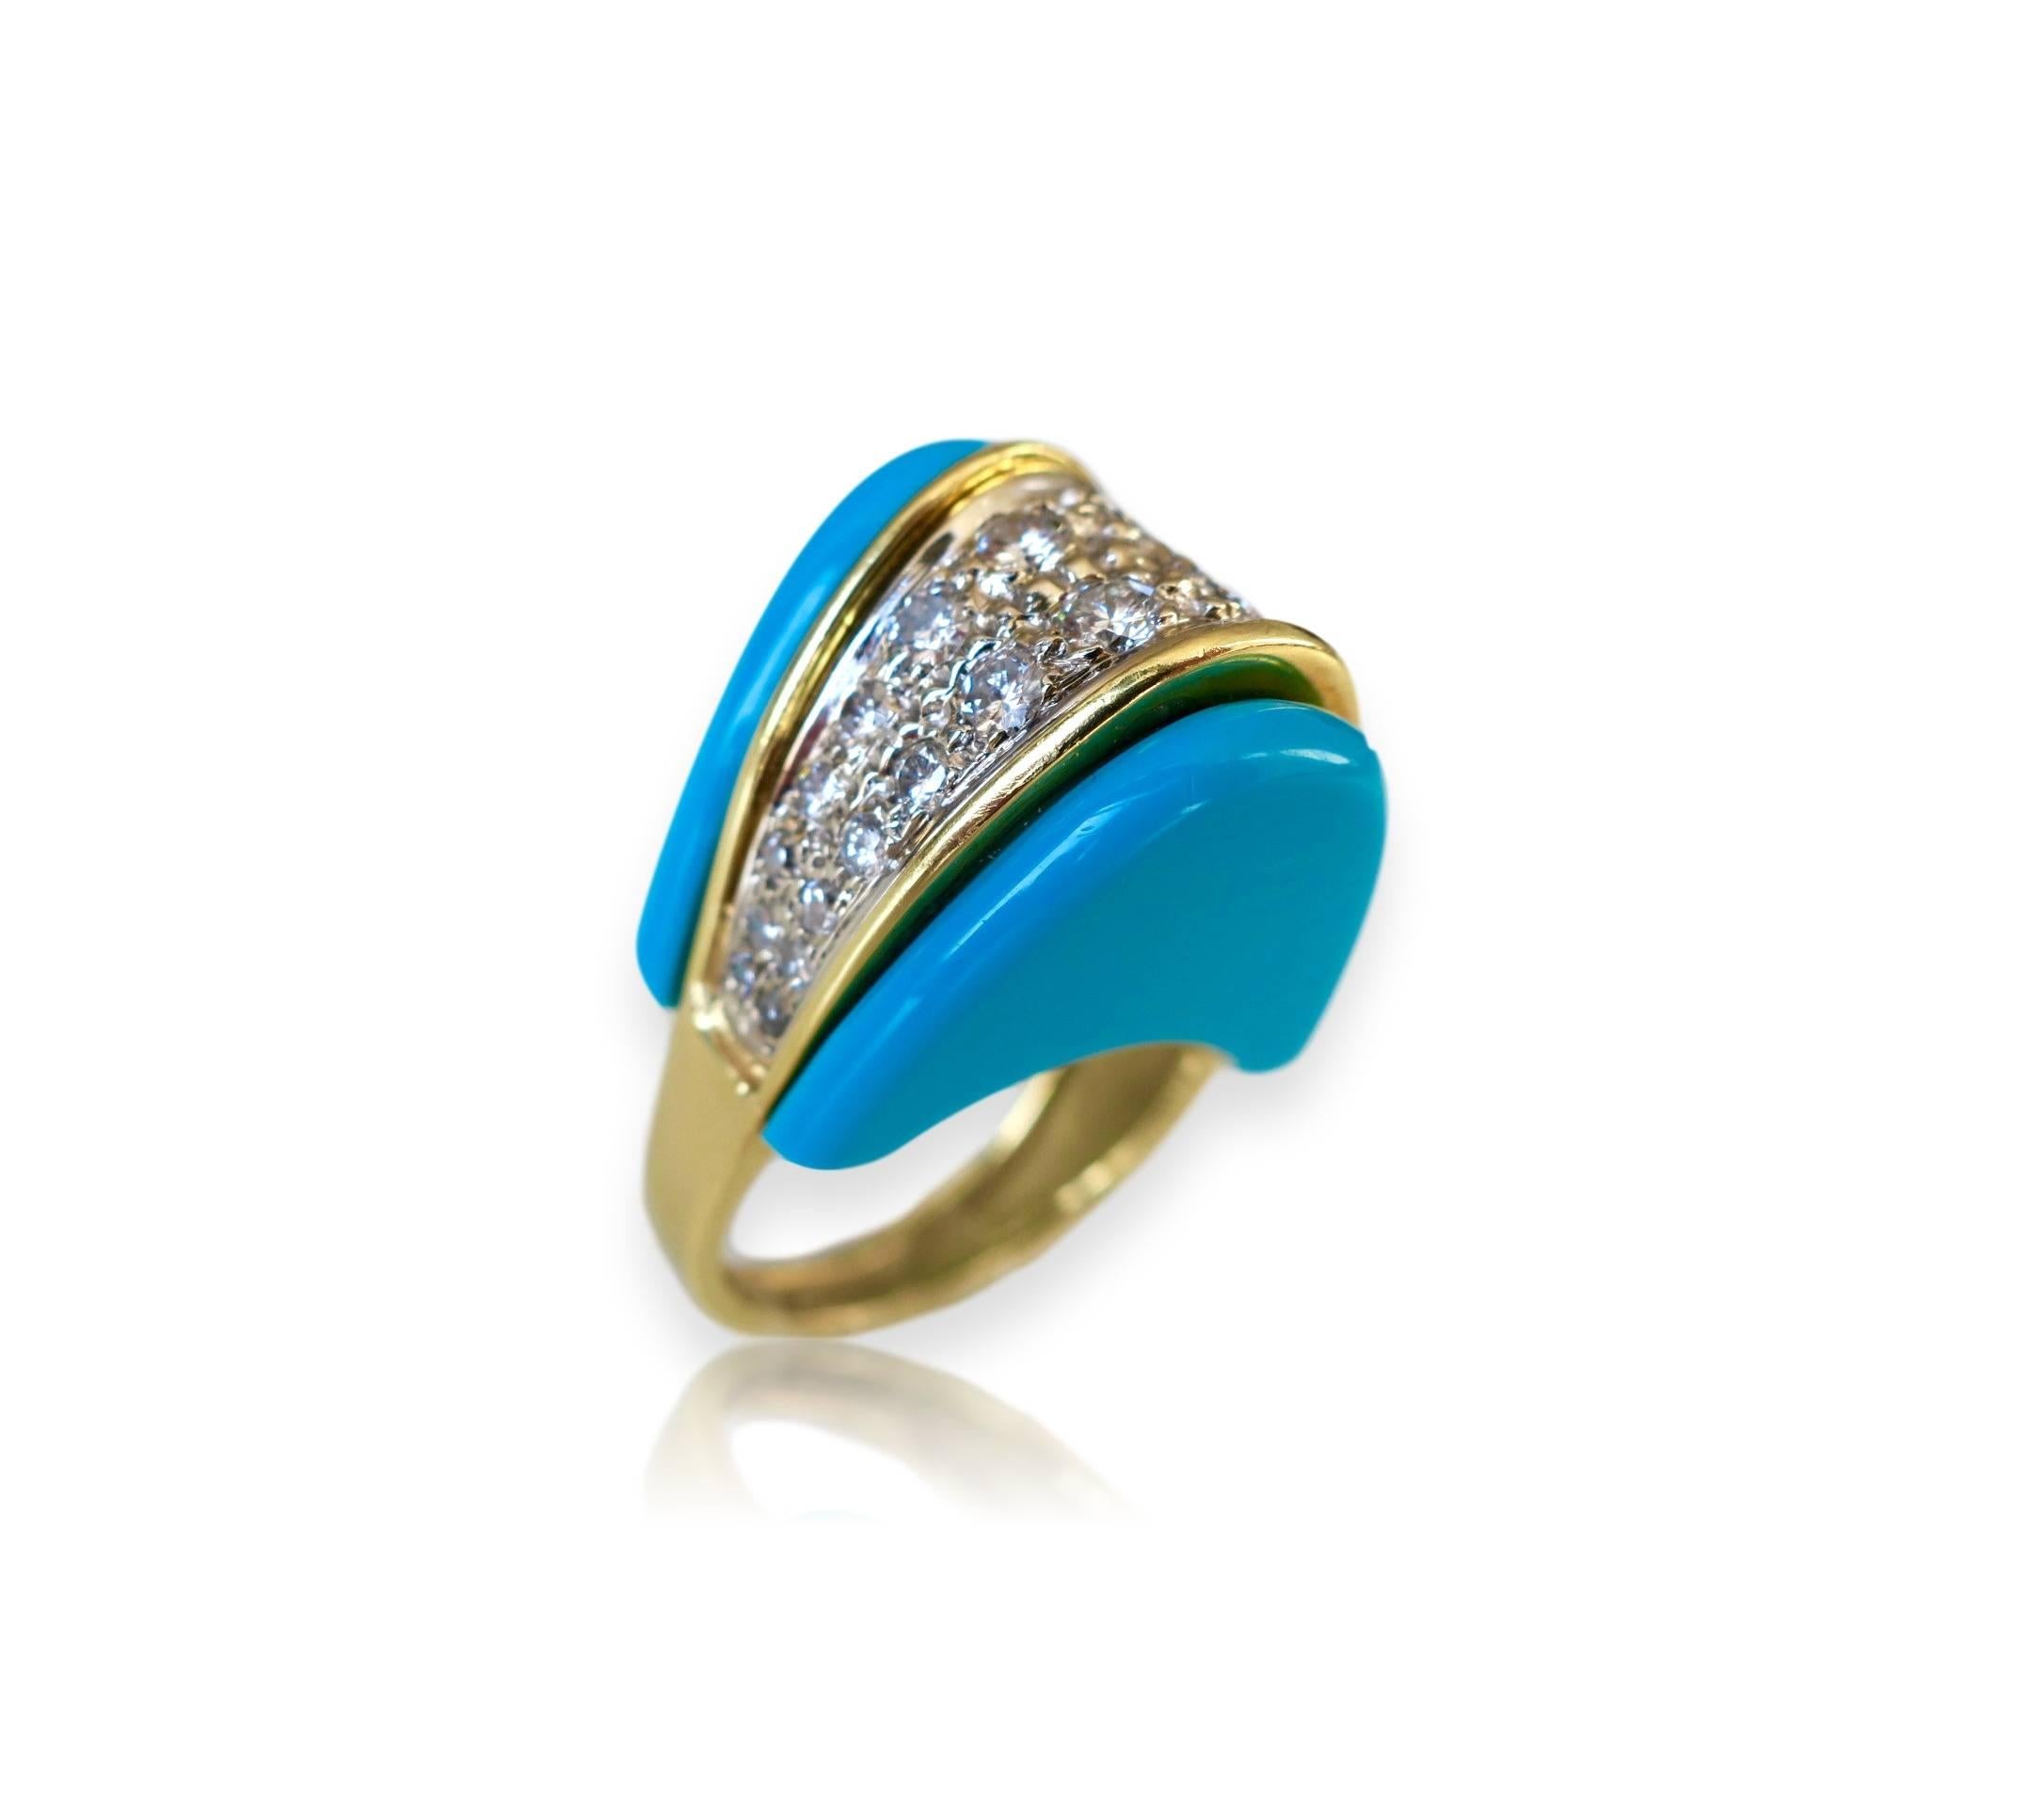 Gold and diamond cocktail ring. The 1 1/2 x 3/4" bright sky-blue and 18k yellow gold  bullet-shaped ring with one carat of round white diamonds. Showy and fun. *Turquoise has not been tested for natural vs lab created. Ring sits 1/2" high.